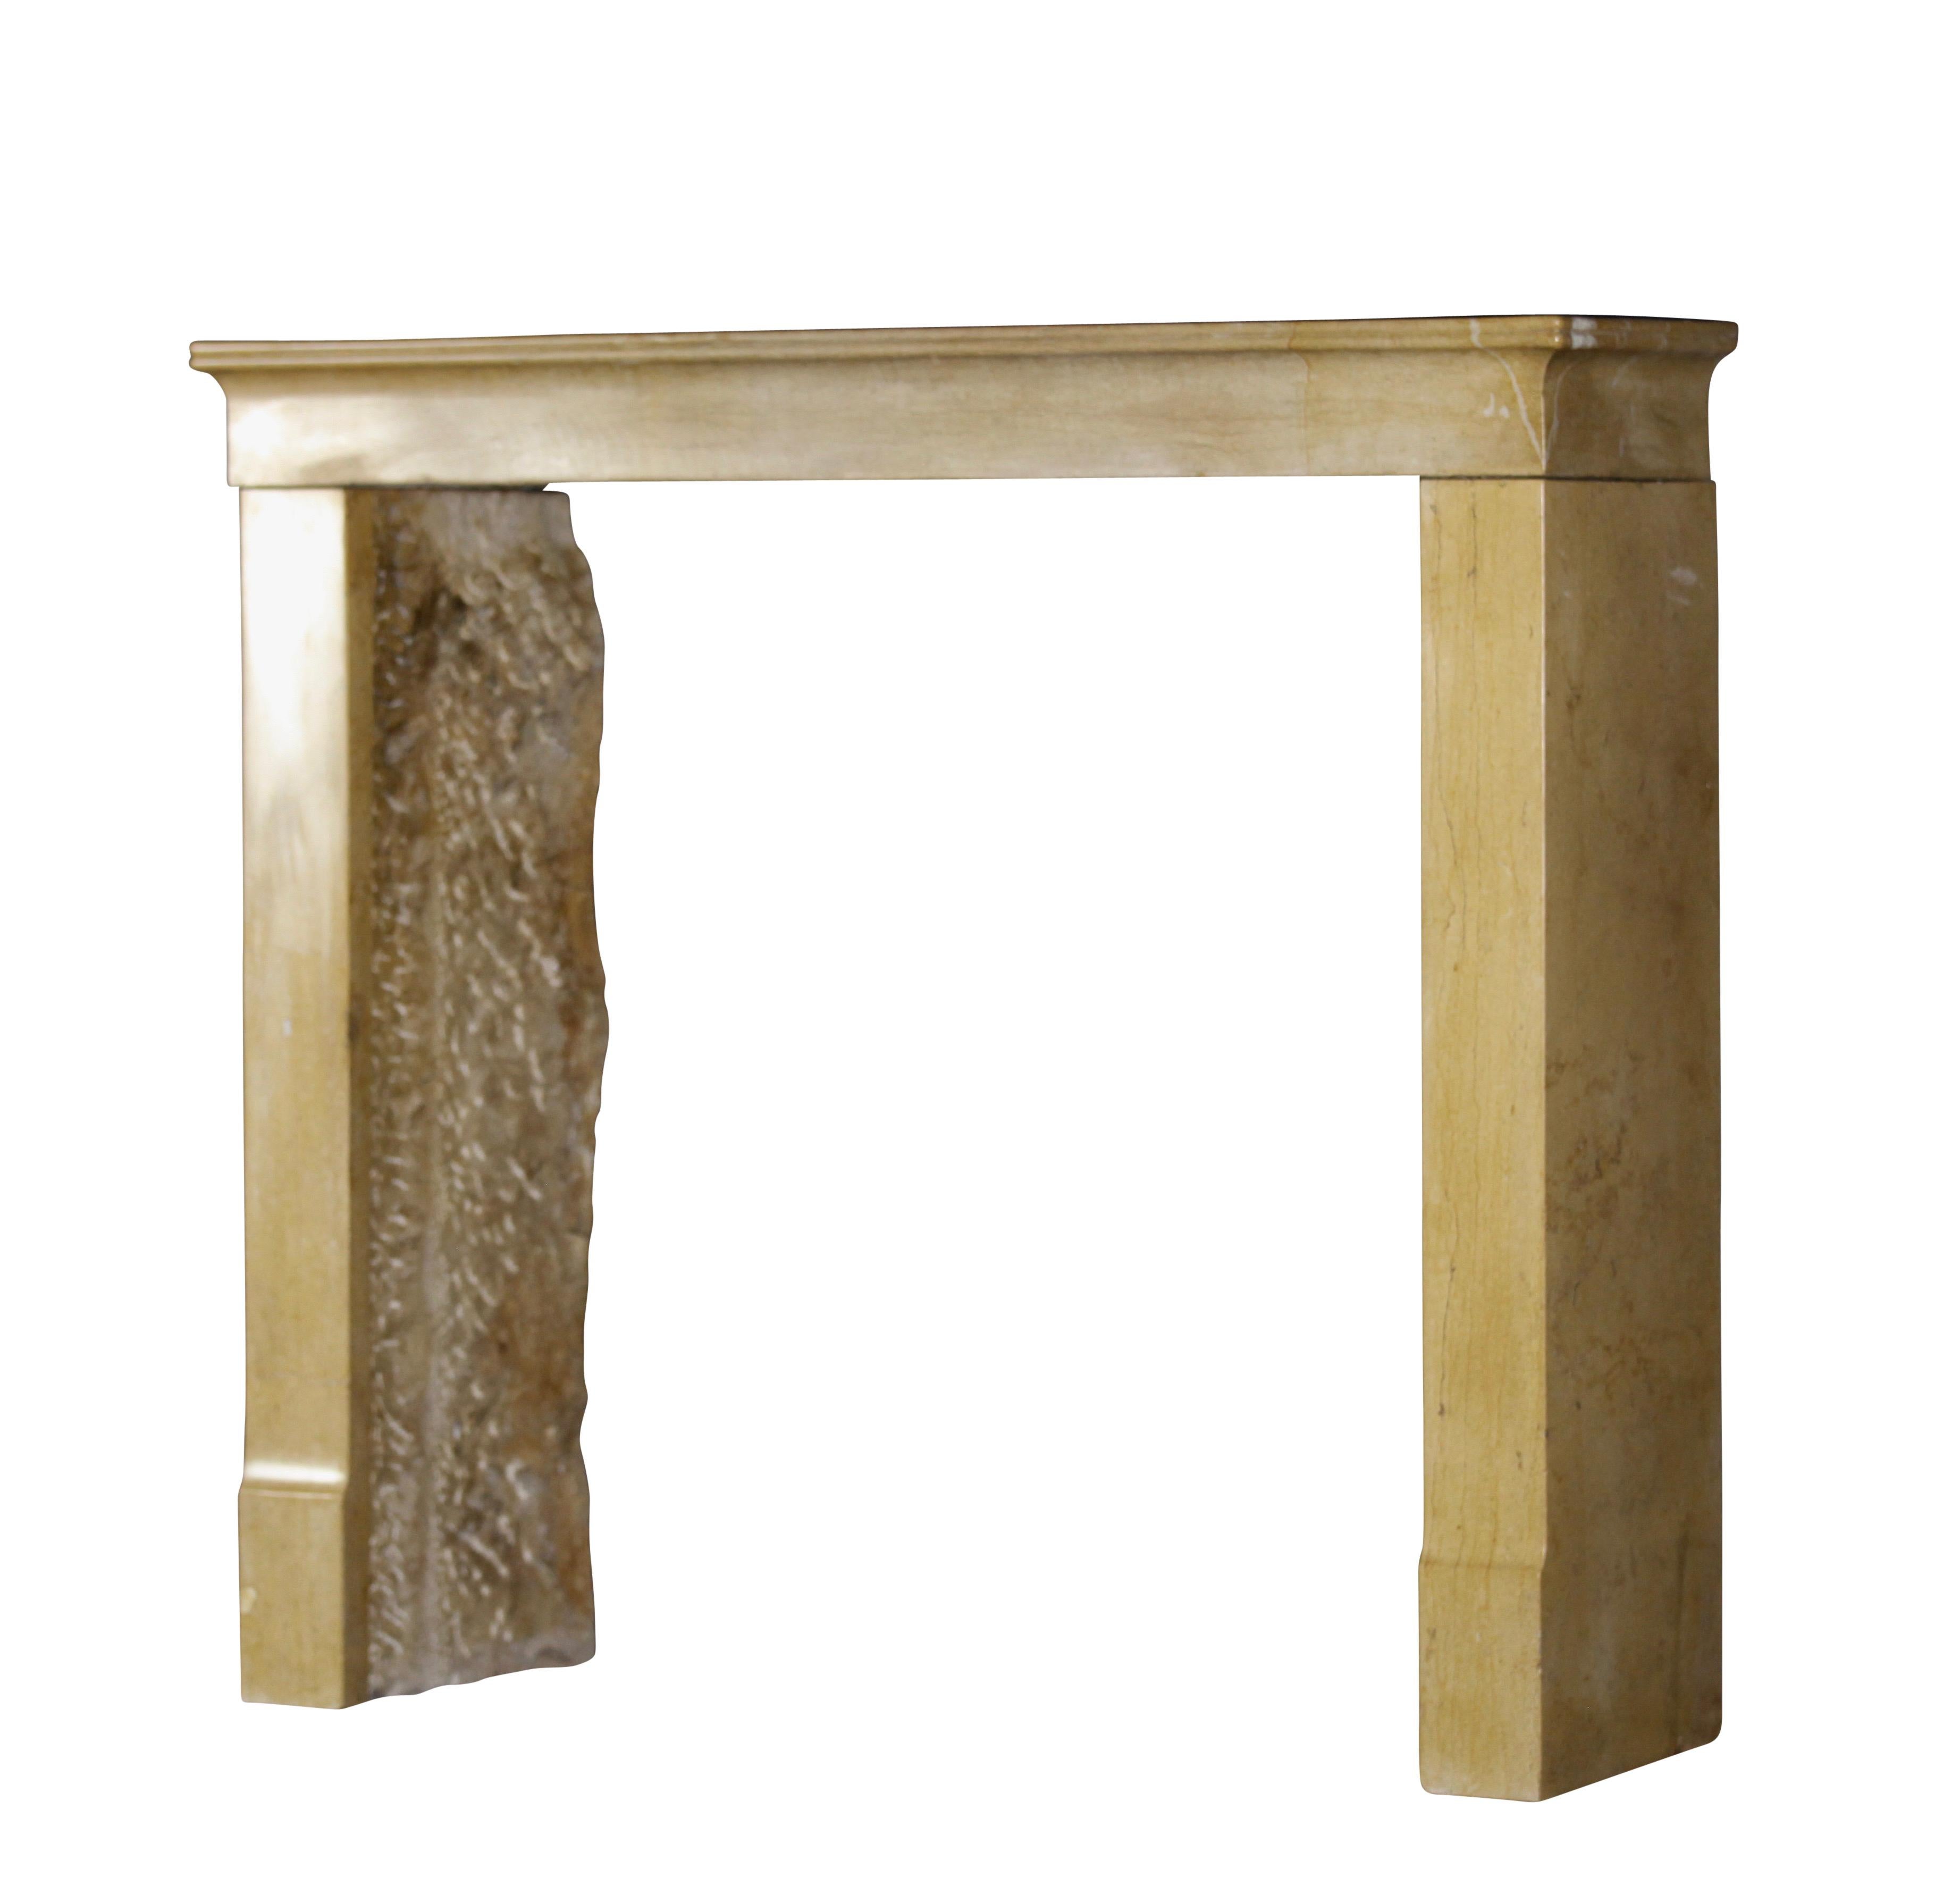 A 19th century French elegant mantle. This is a petite original antique fireplace surround. A typical petite bourguignon in it typical honey color hard stone from that region. Dijon. Perfect to create a cosy timeless room.
Measures:
108 cm